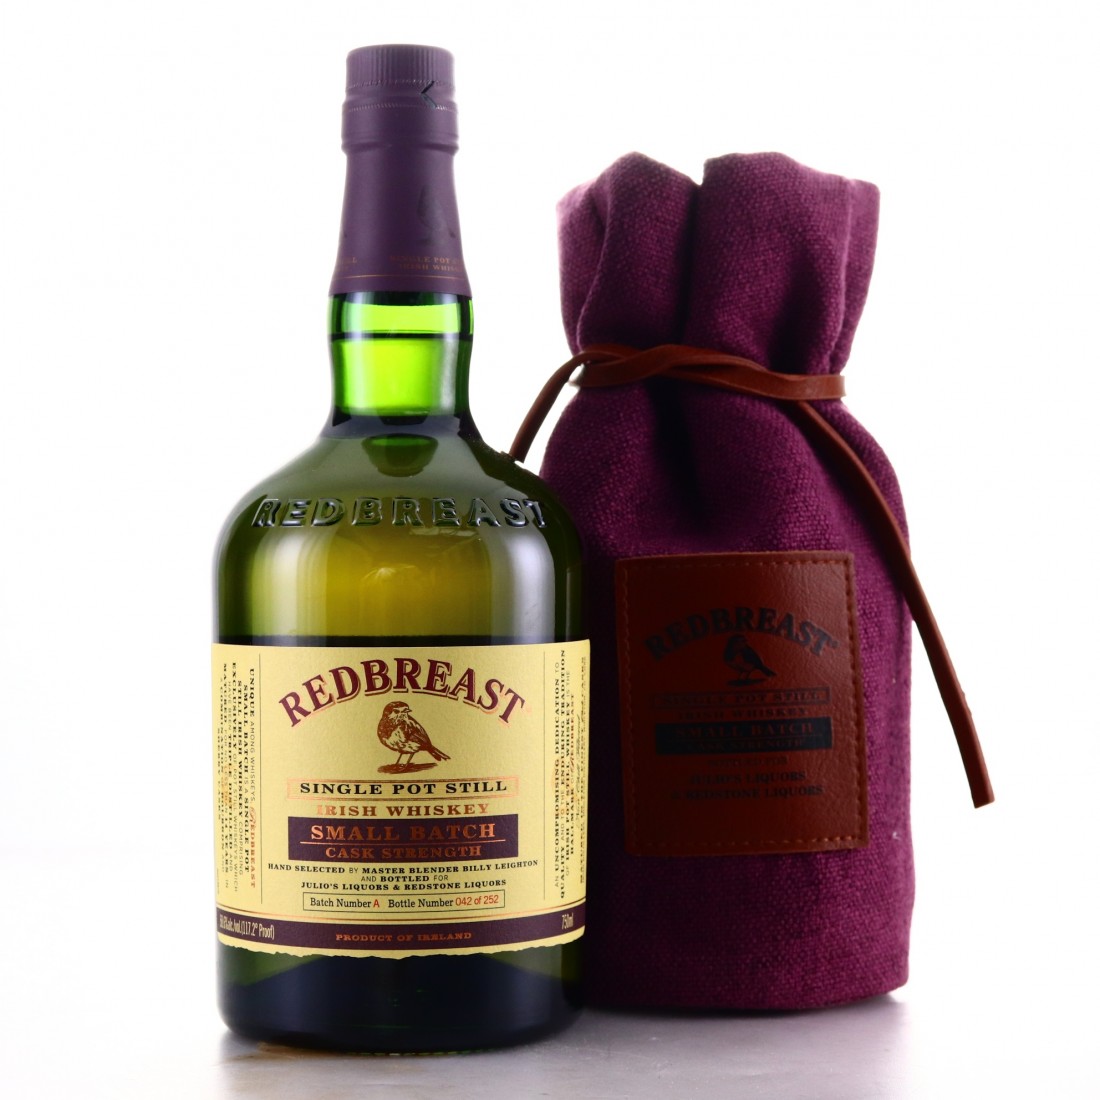 Review #129 – Redbreast Small Batch Cask Strength “B”